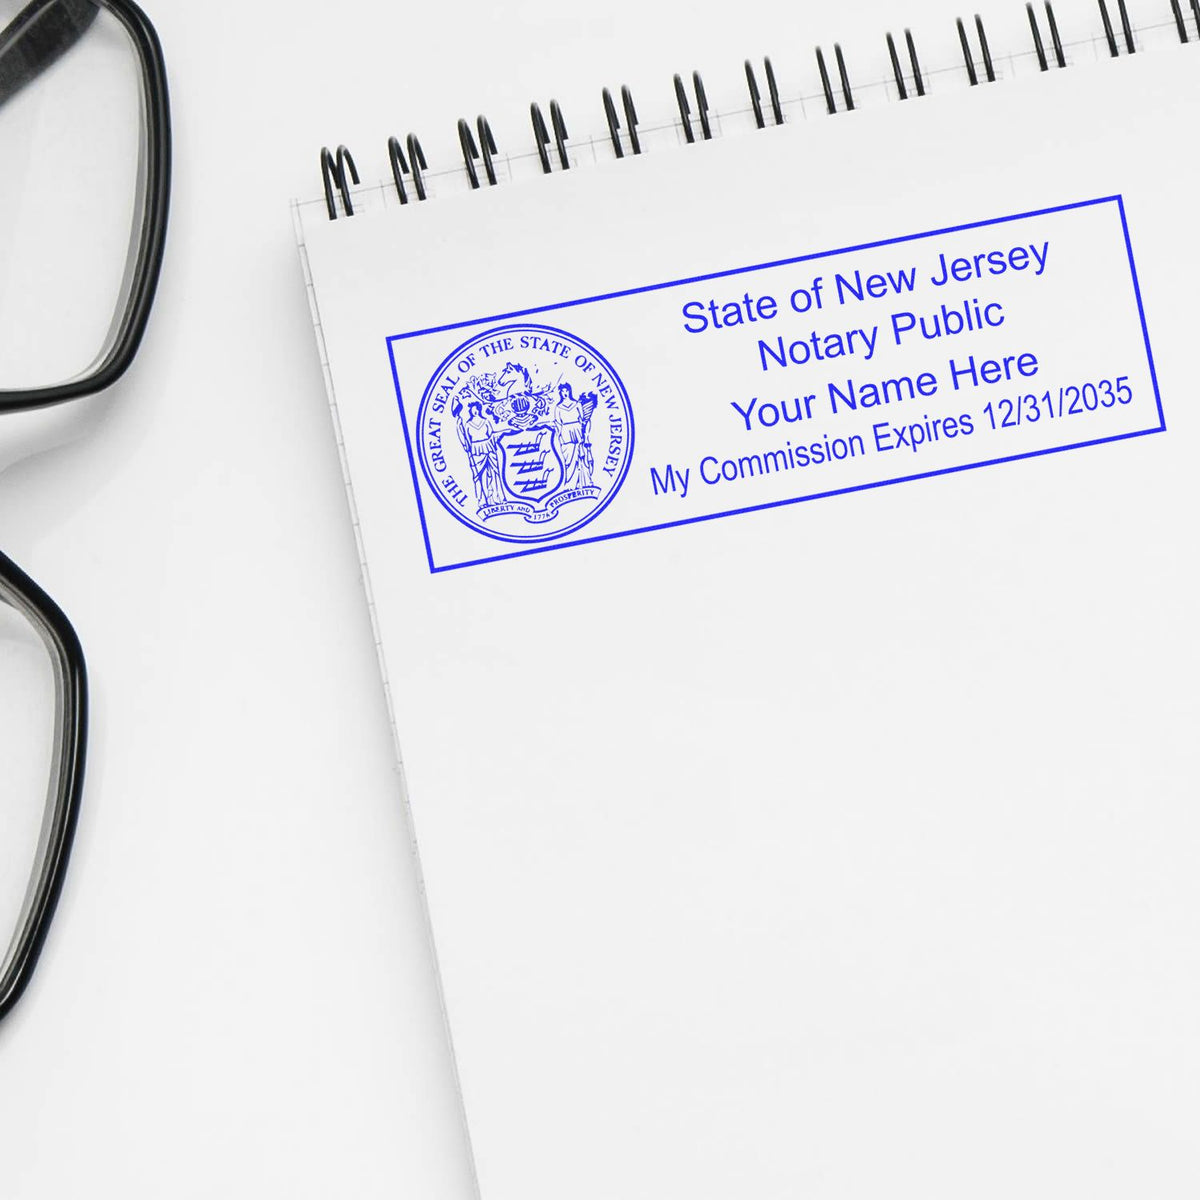 An alternative view of the Super Slim New Jersey Notary Public Stamp stamped on a sheet of paper showing the image in use